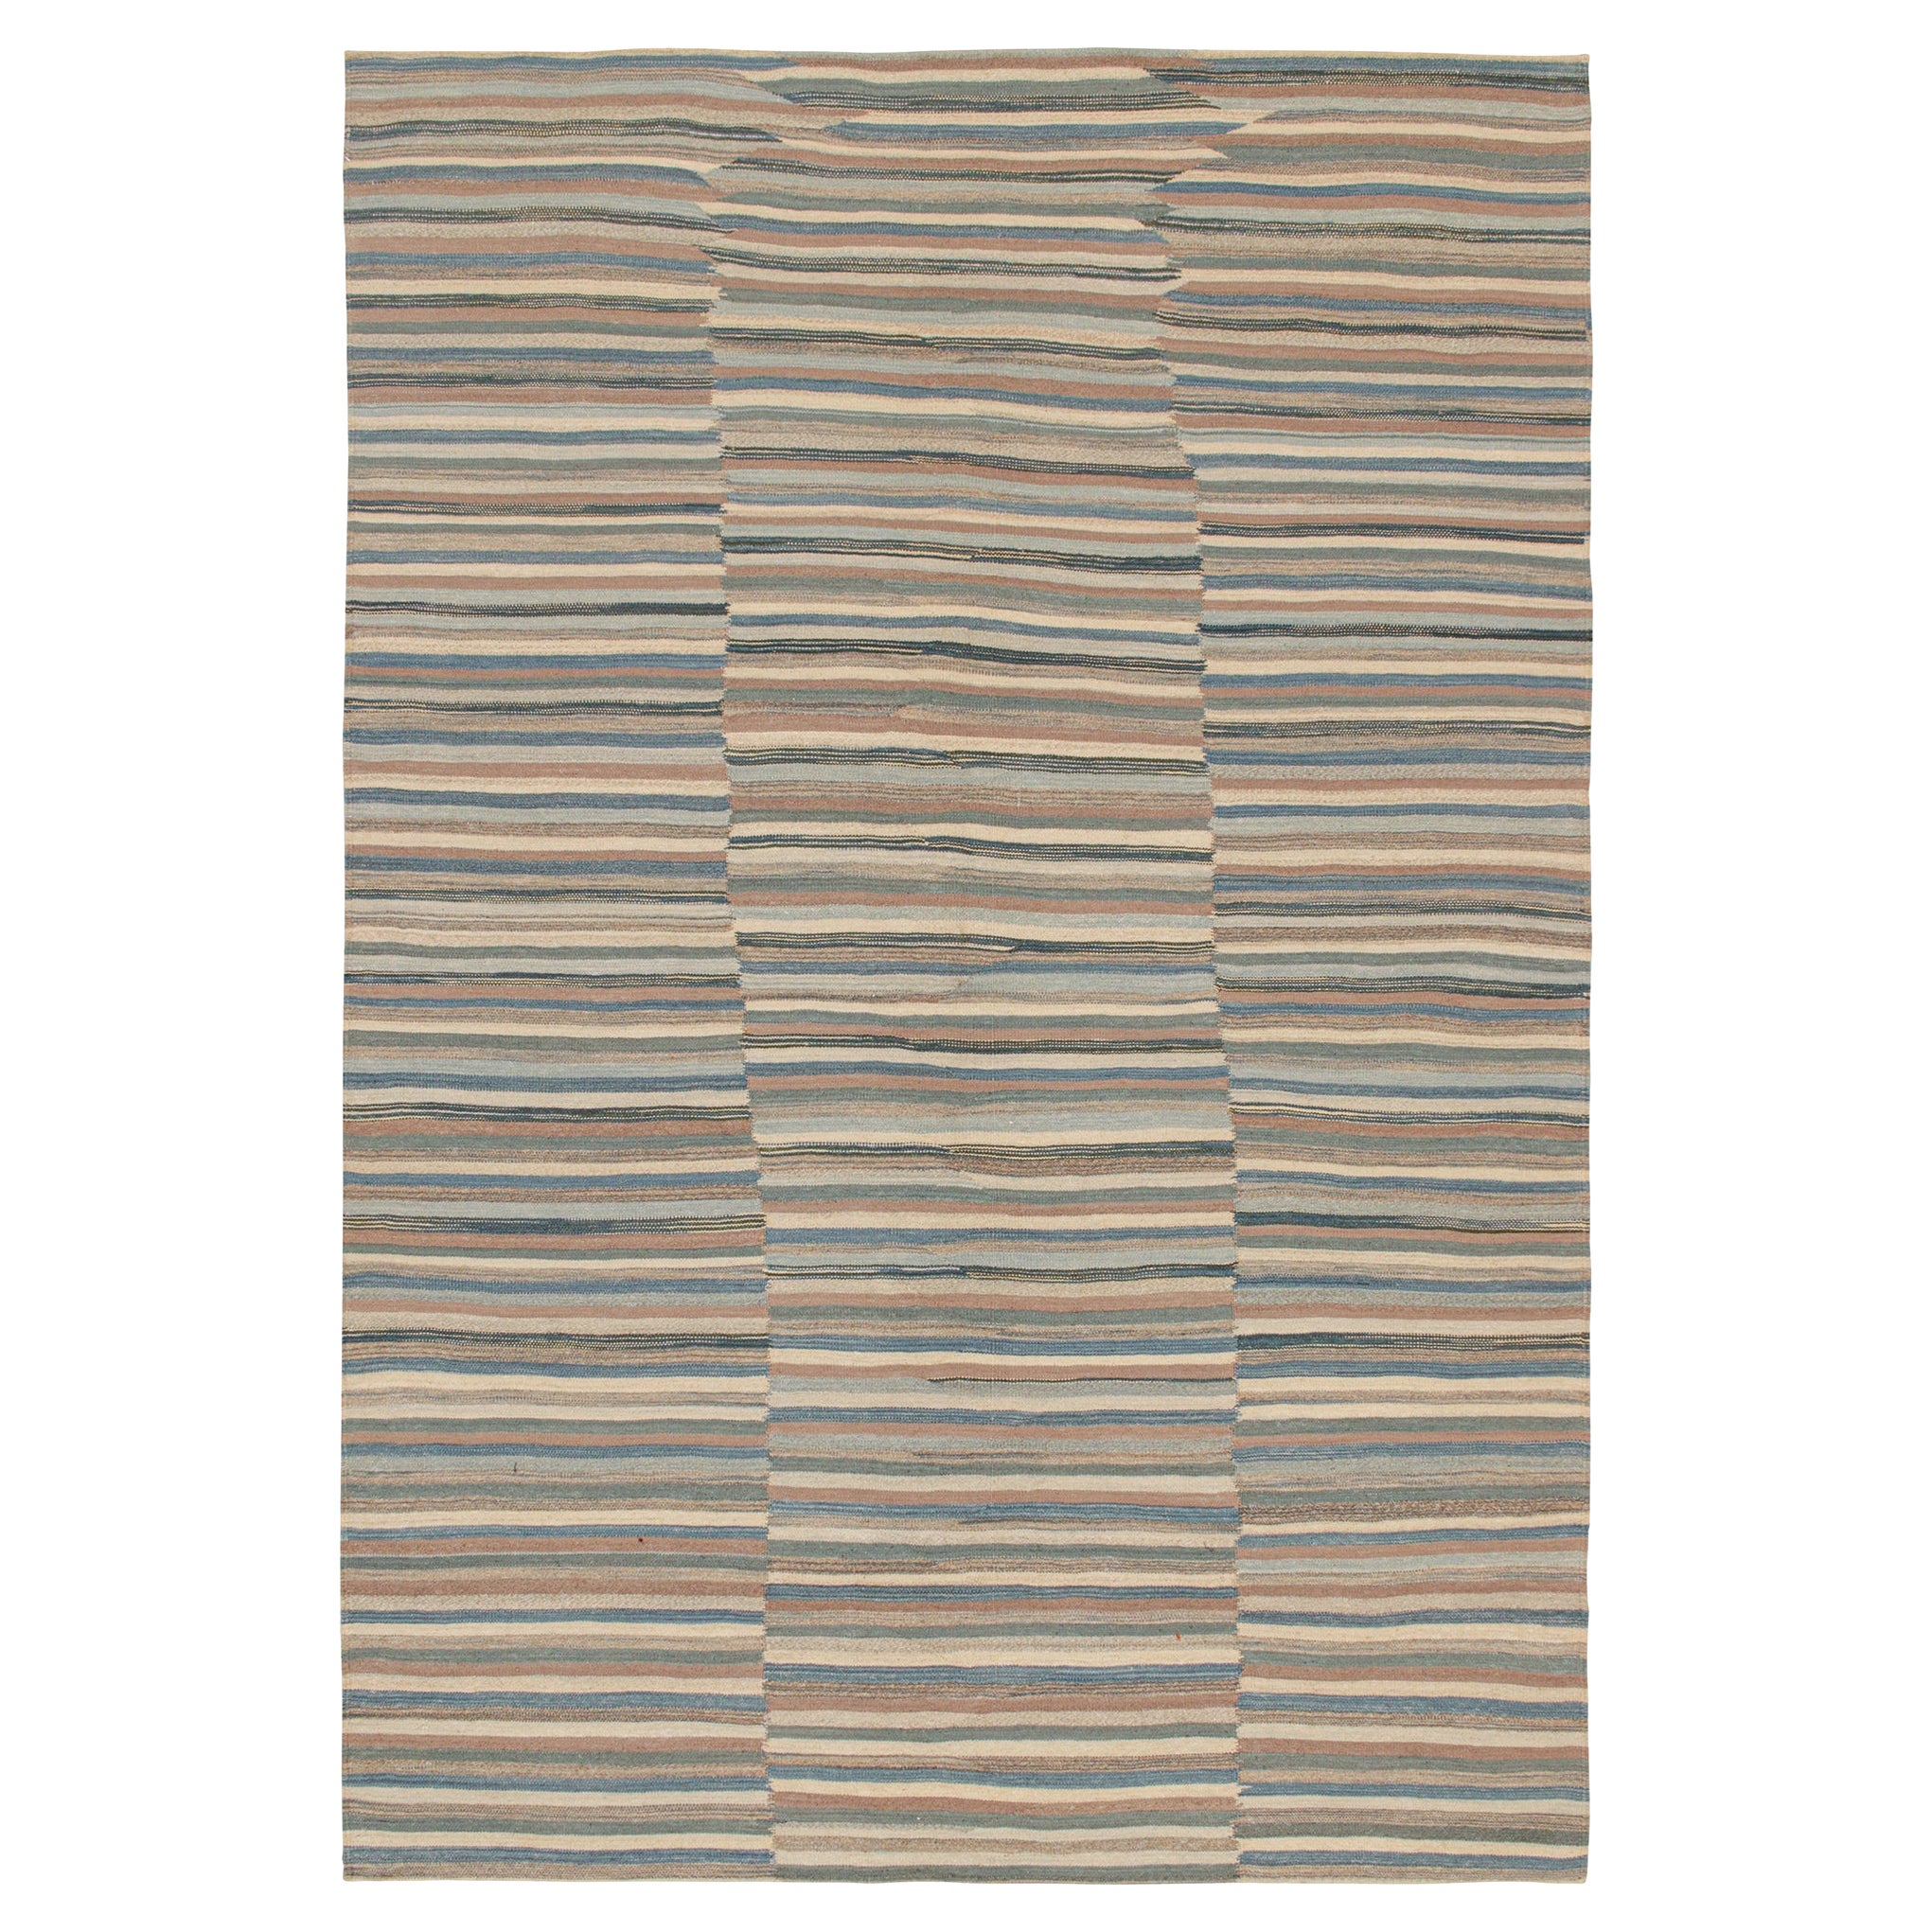 Vintage Persian Kilim with Panels in Beige-Brown and Blue Stripes by Rug & Kilim For Sale